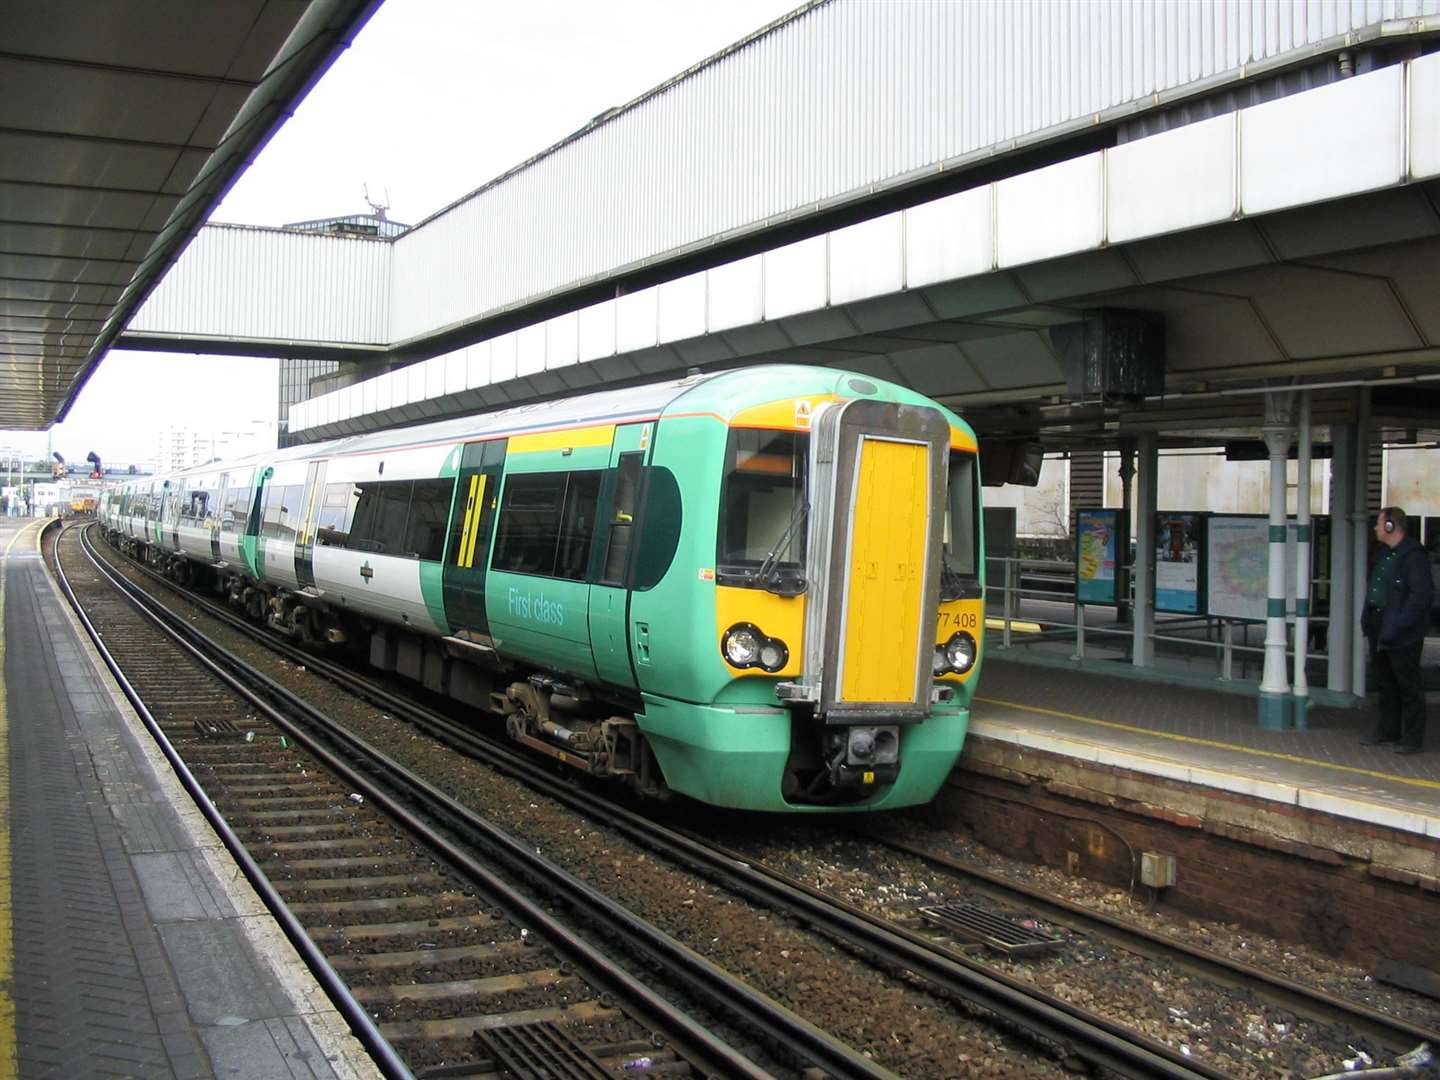 Southern Railways has apologised for the delay